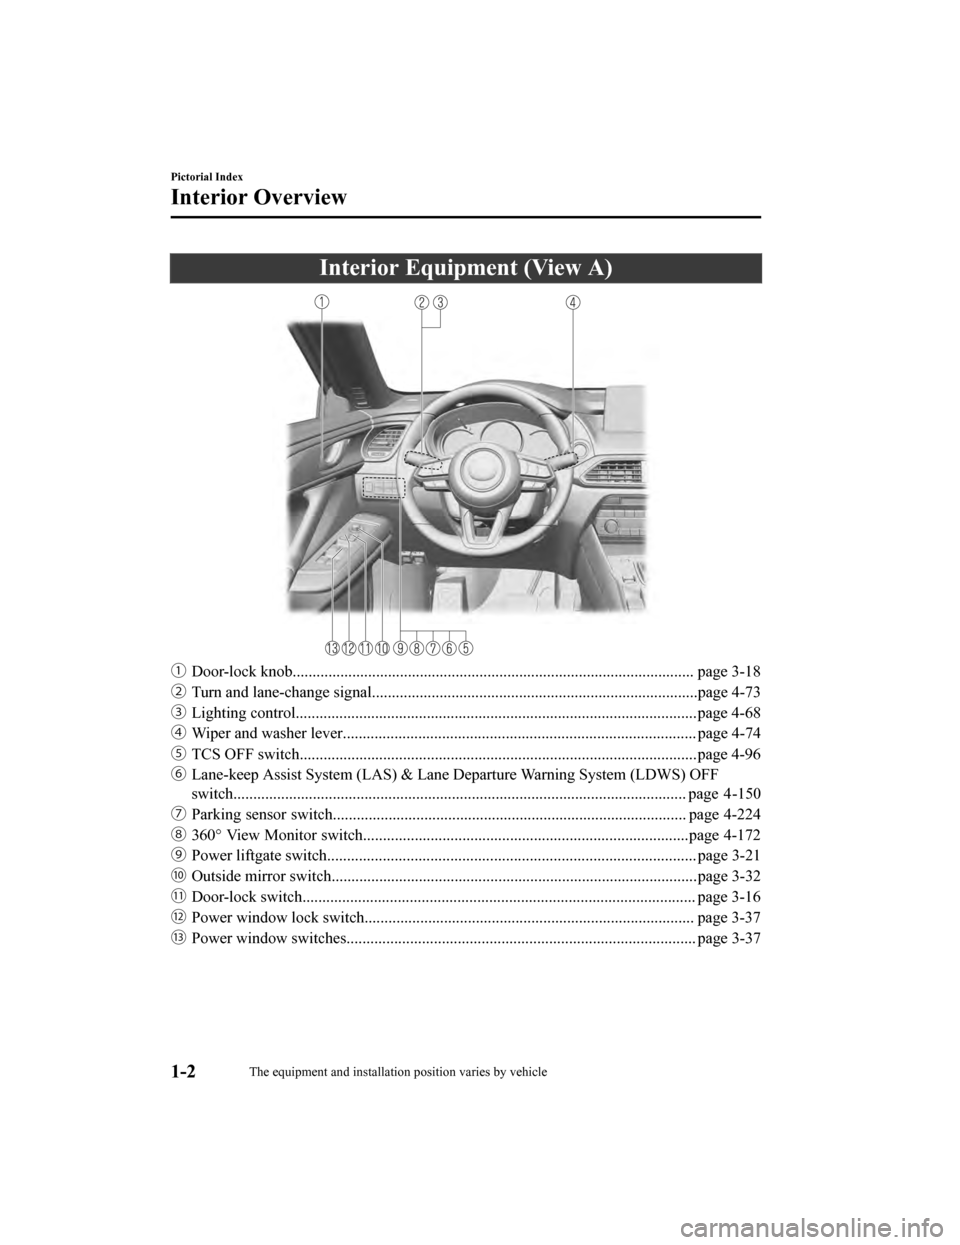 MAZDA MODEL CX-9 2019  Owners Manual (in English) Interior Equipment (View A)
ƒDoor-lock knob..................................................................................................... page 3-18
„ Turn and lane-change sig nal..........